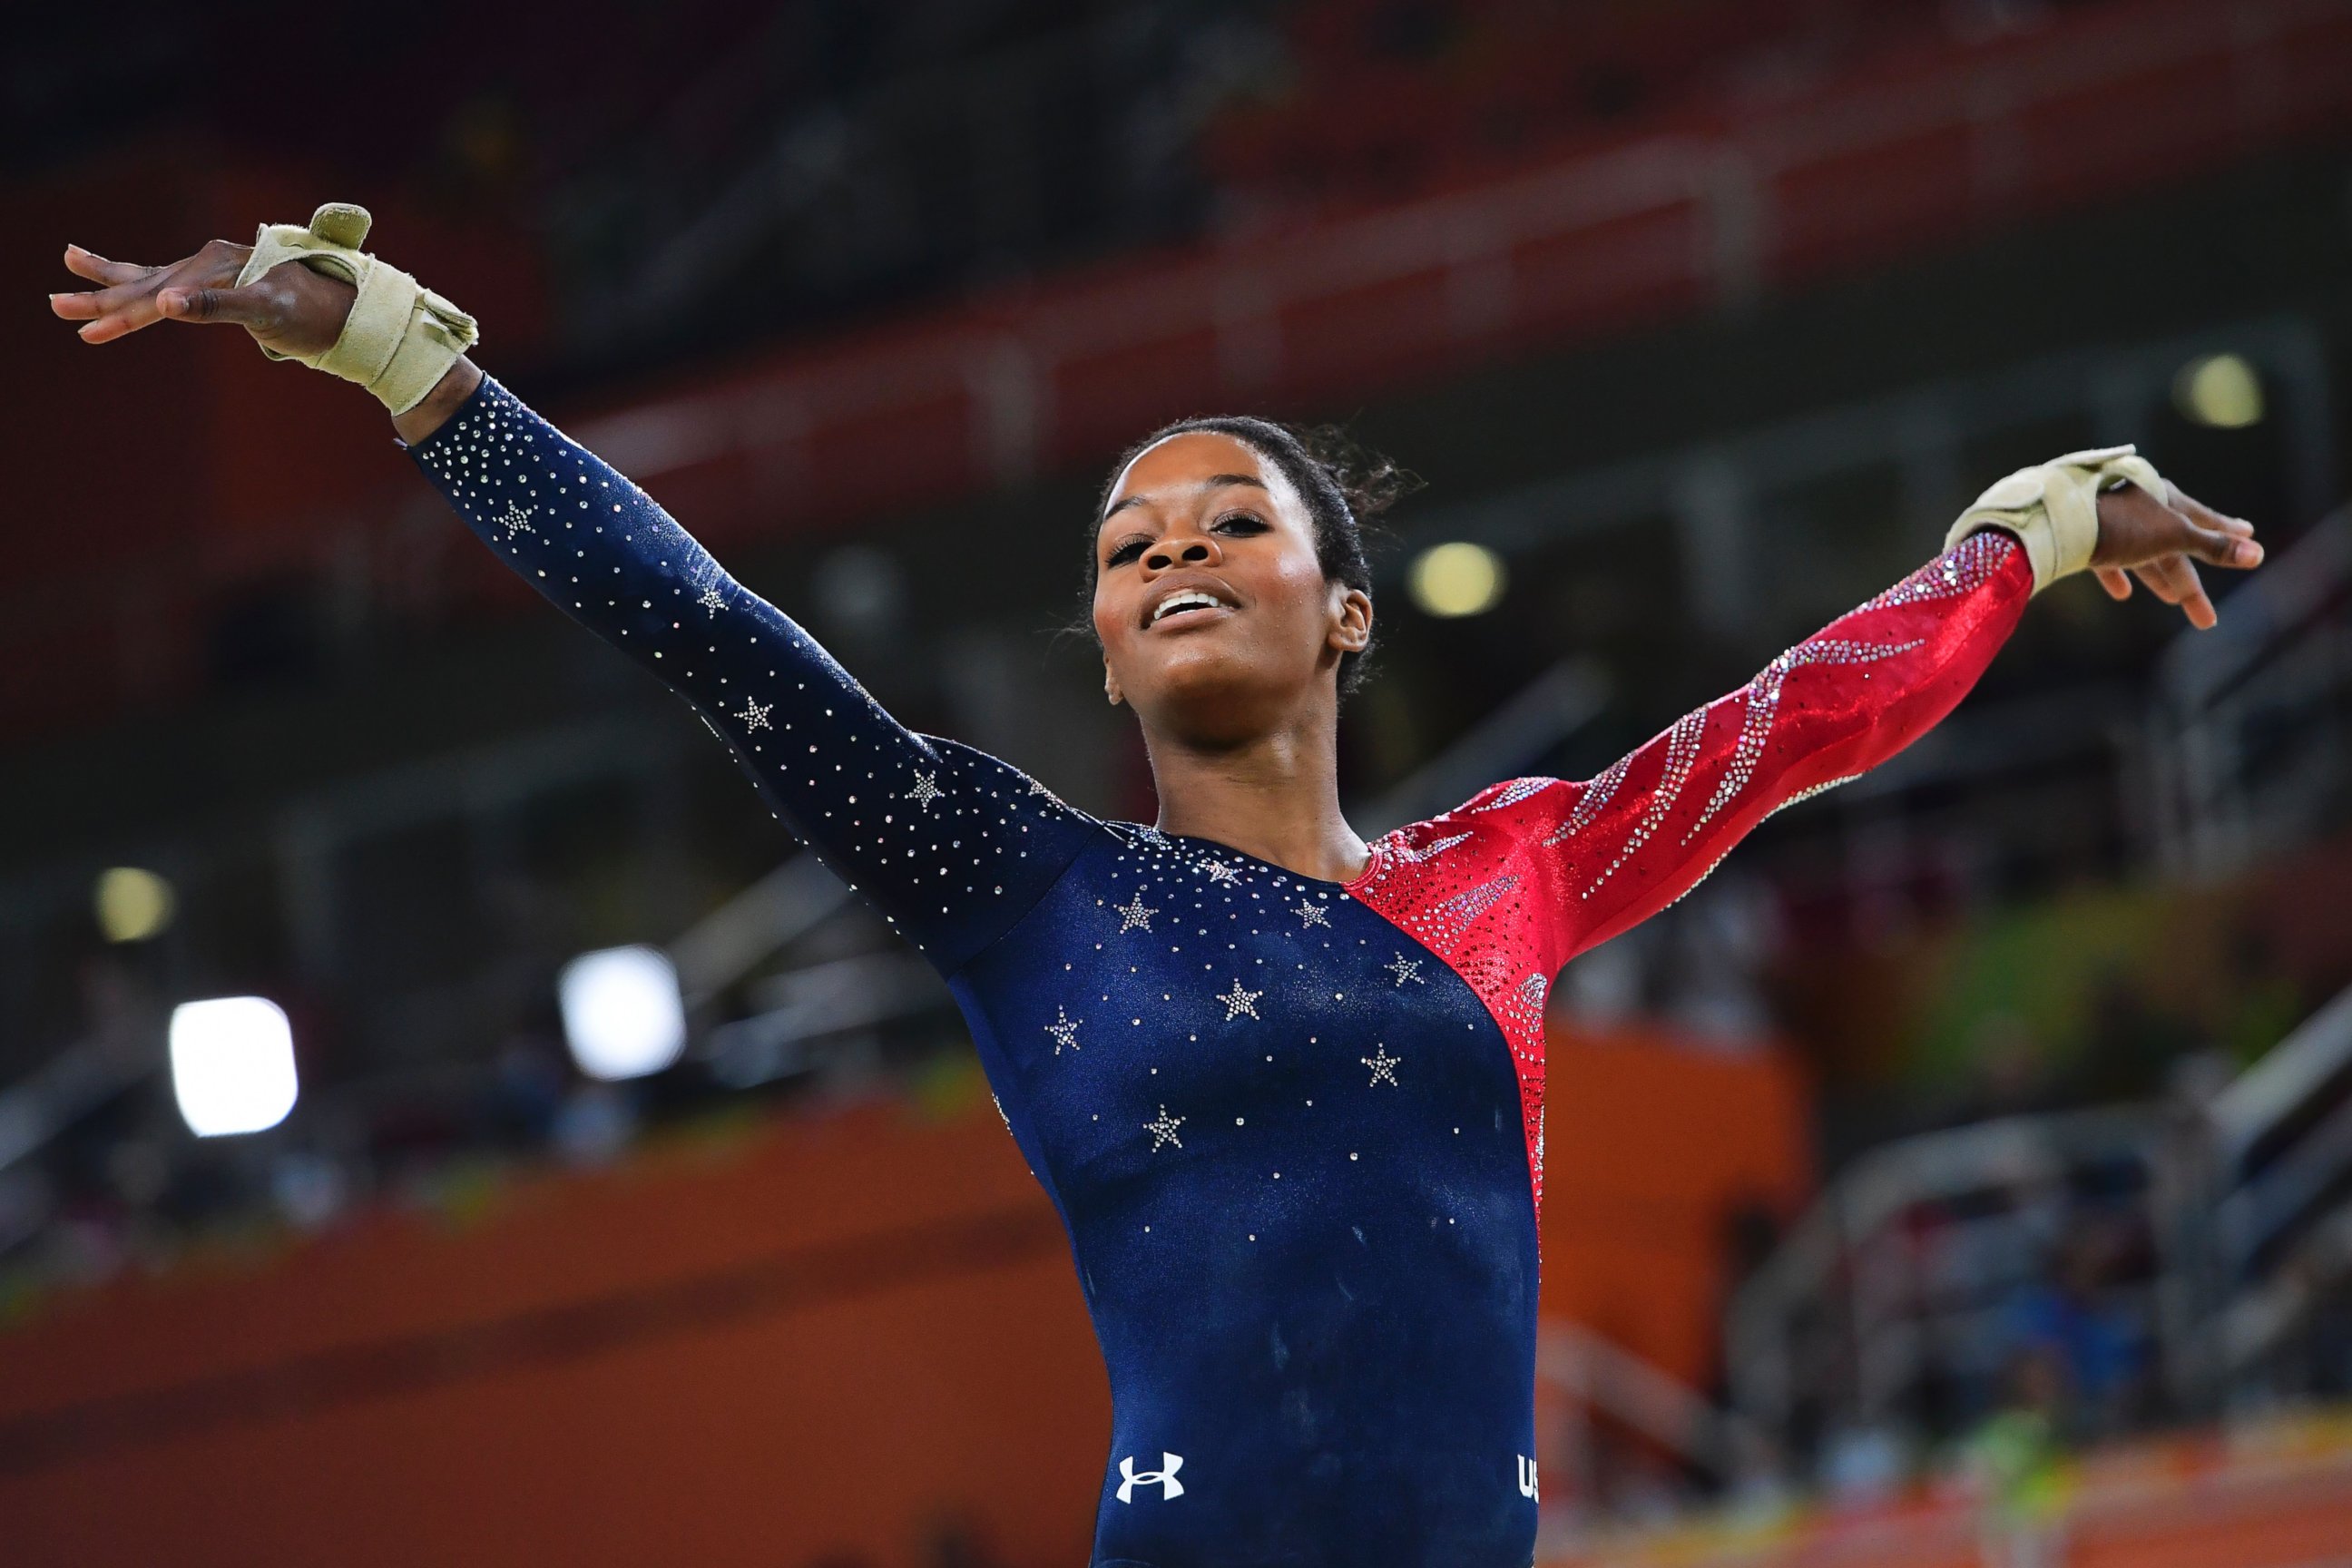 PHOTO: Gabrielle Douglas competes in the qualifying for the women's Floor event of the Artistic Gymnastics at the Olympic Arena during the Rio 2016 Olympic Games in Rio de Janeiro on Aug. 7, 2016.